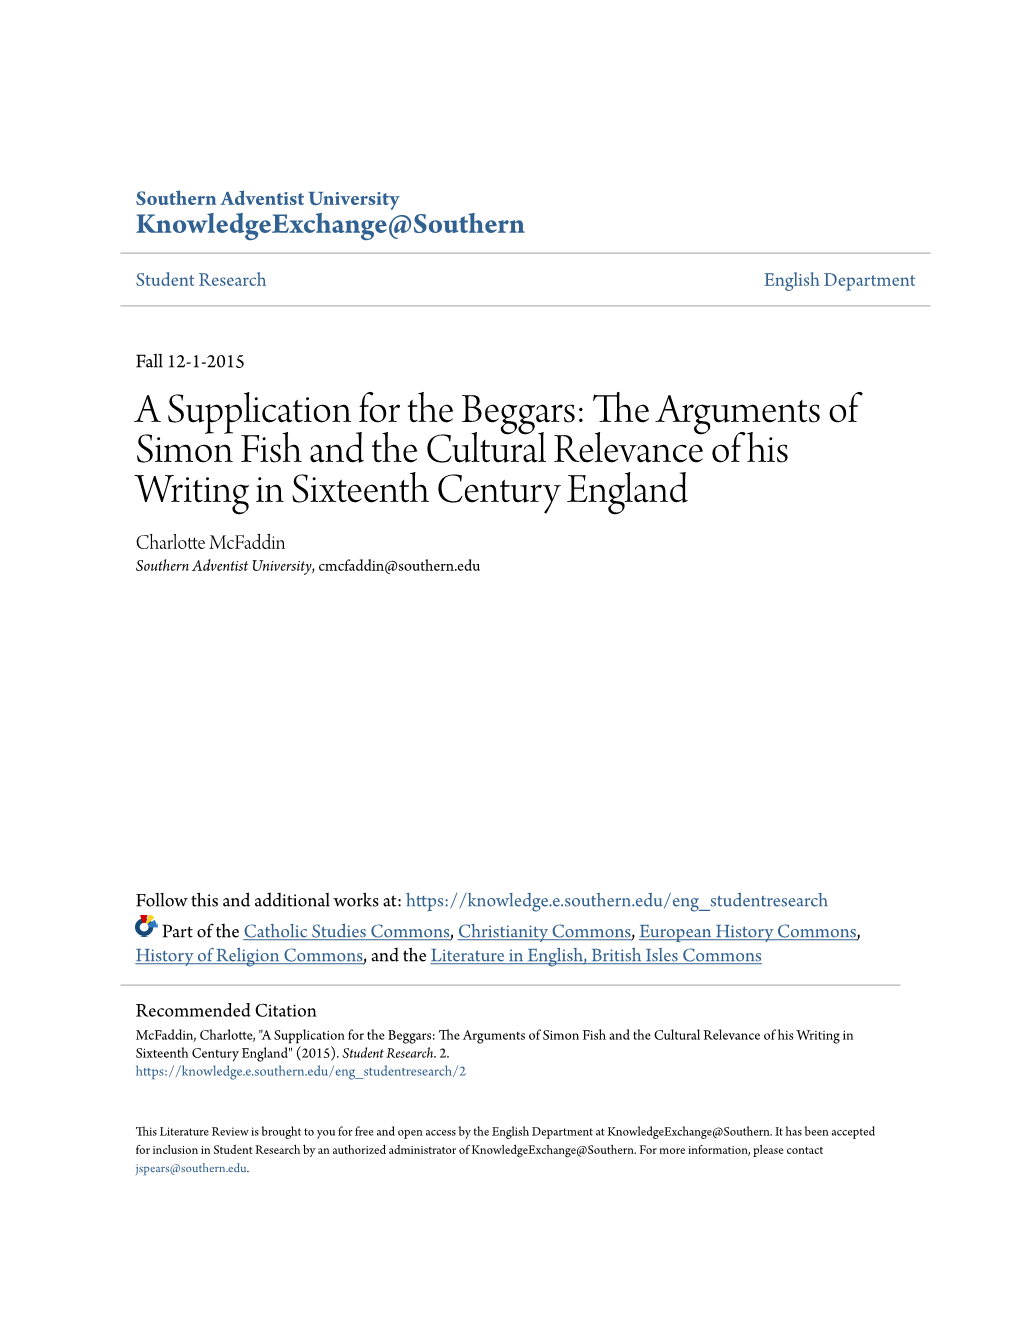 A Supplication for the Beggars: the Arguments of Simon Fish and the Cultural Relevance of His Writing in Sixteenth Century Engla